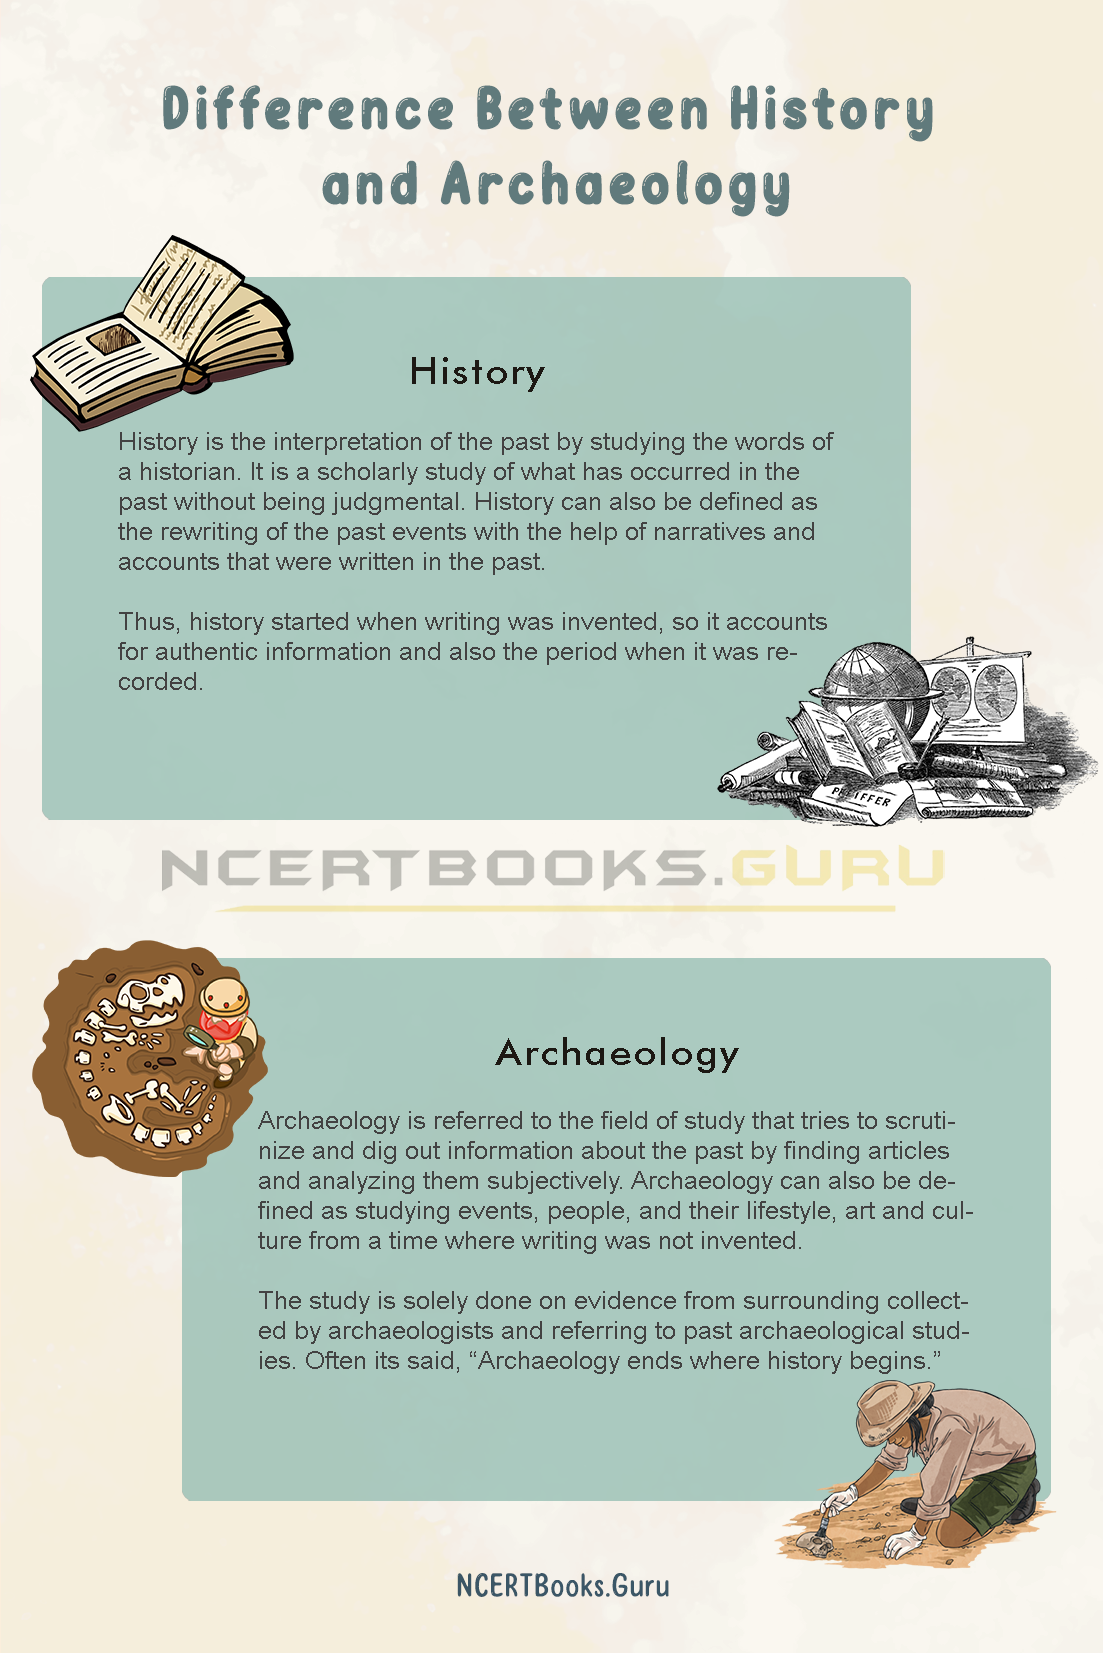 Differences Between History and Archaeology 1